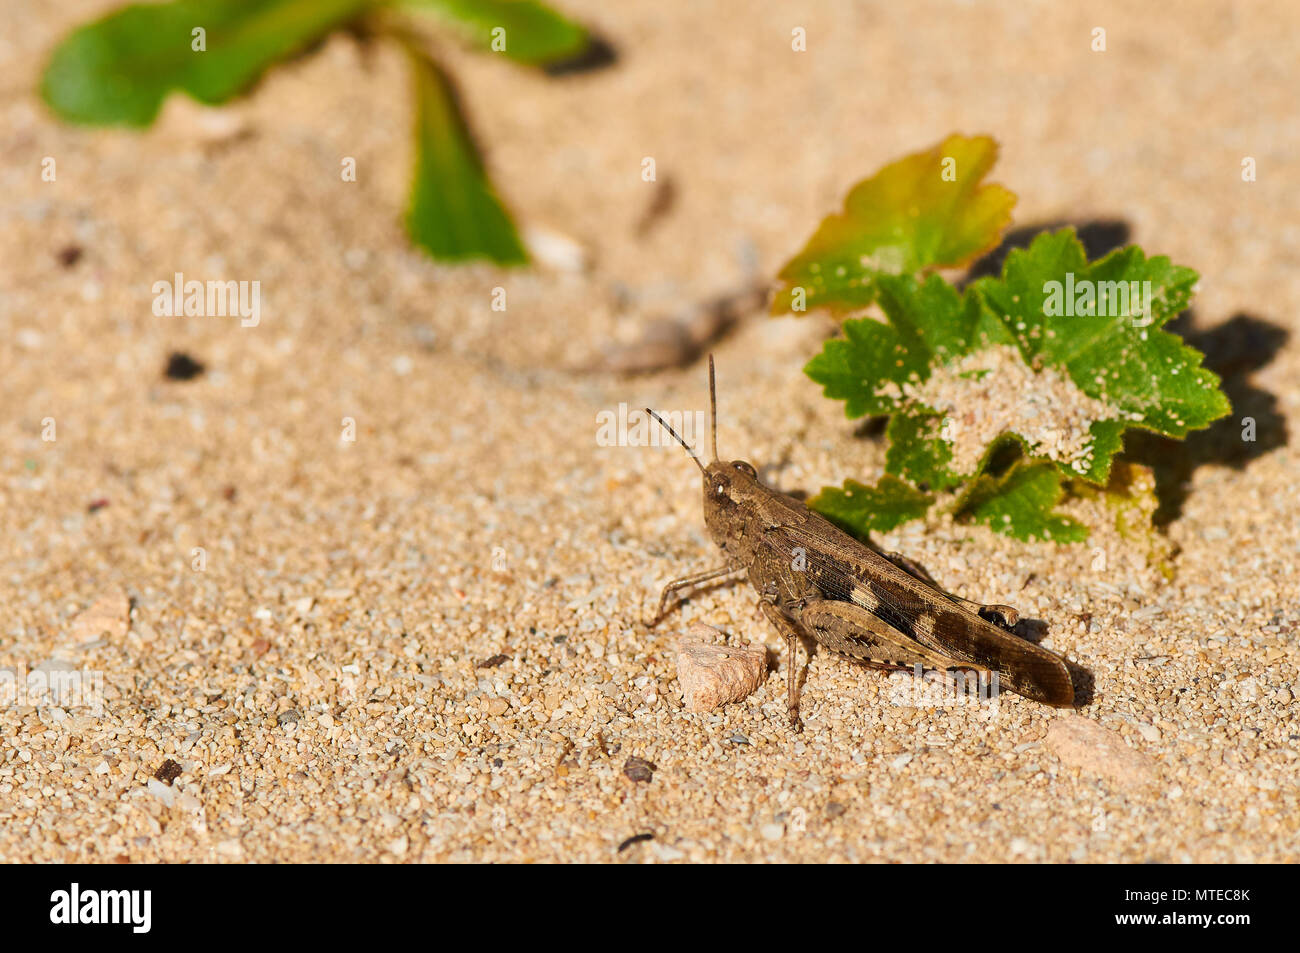 A Broad Green-winged Grasshopper (Aiolopus strepens) in the sand in Ses Salines Natural Park (Formentera, Balearic Islands, Spain) Stock Photo